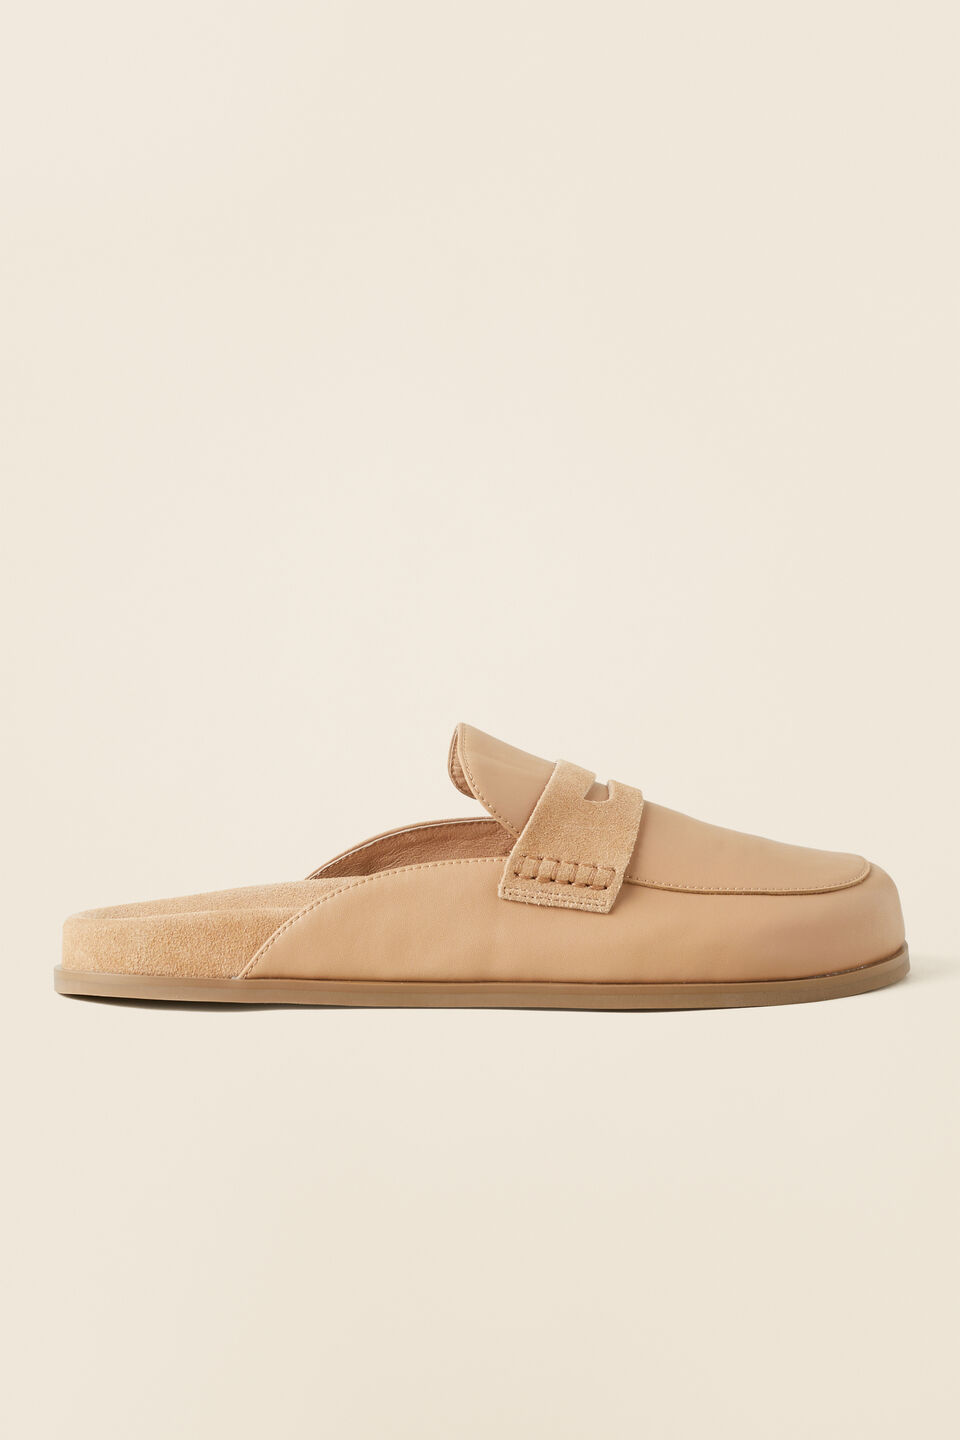 Willow Leather Loafer Mule  Caramel  hi-res